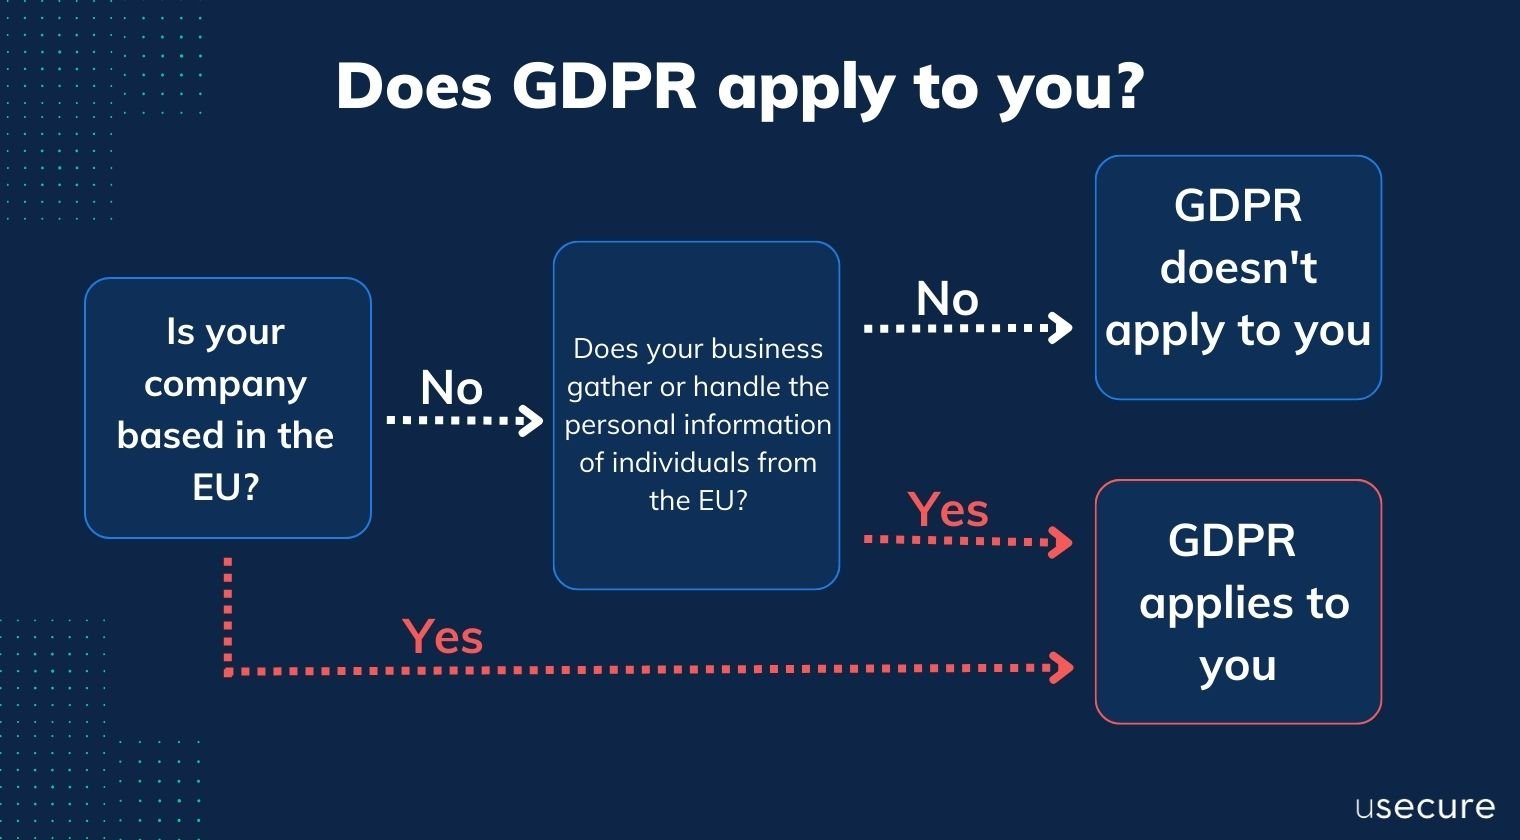 Does GDPR apply to you